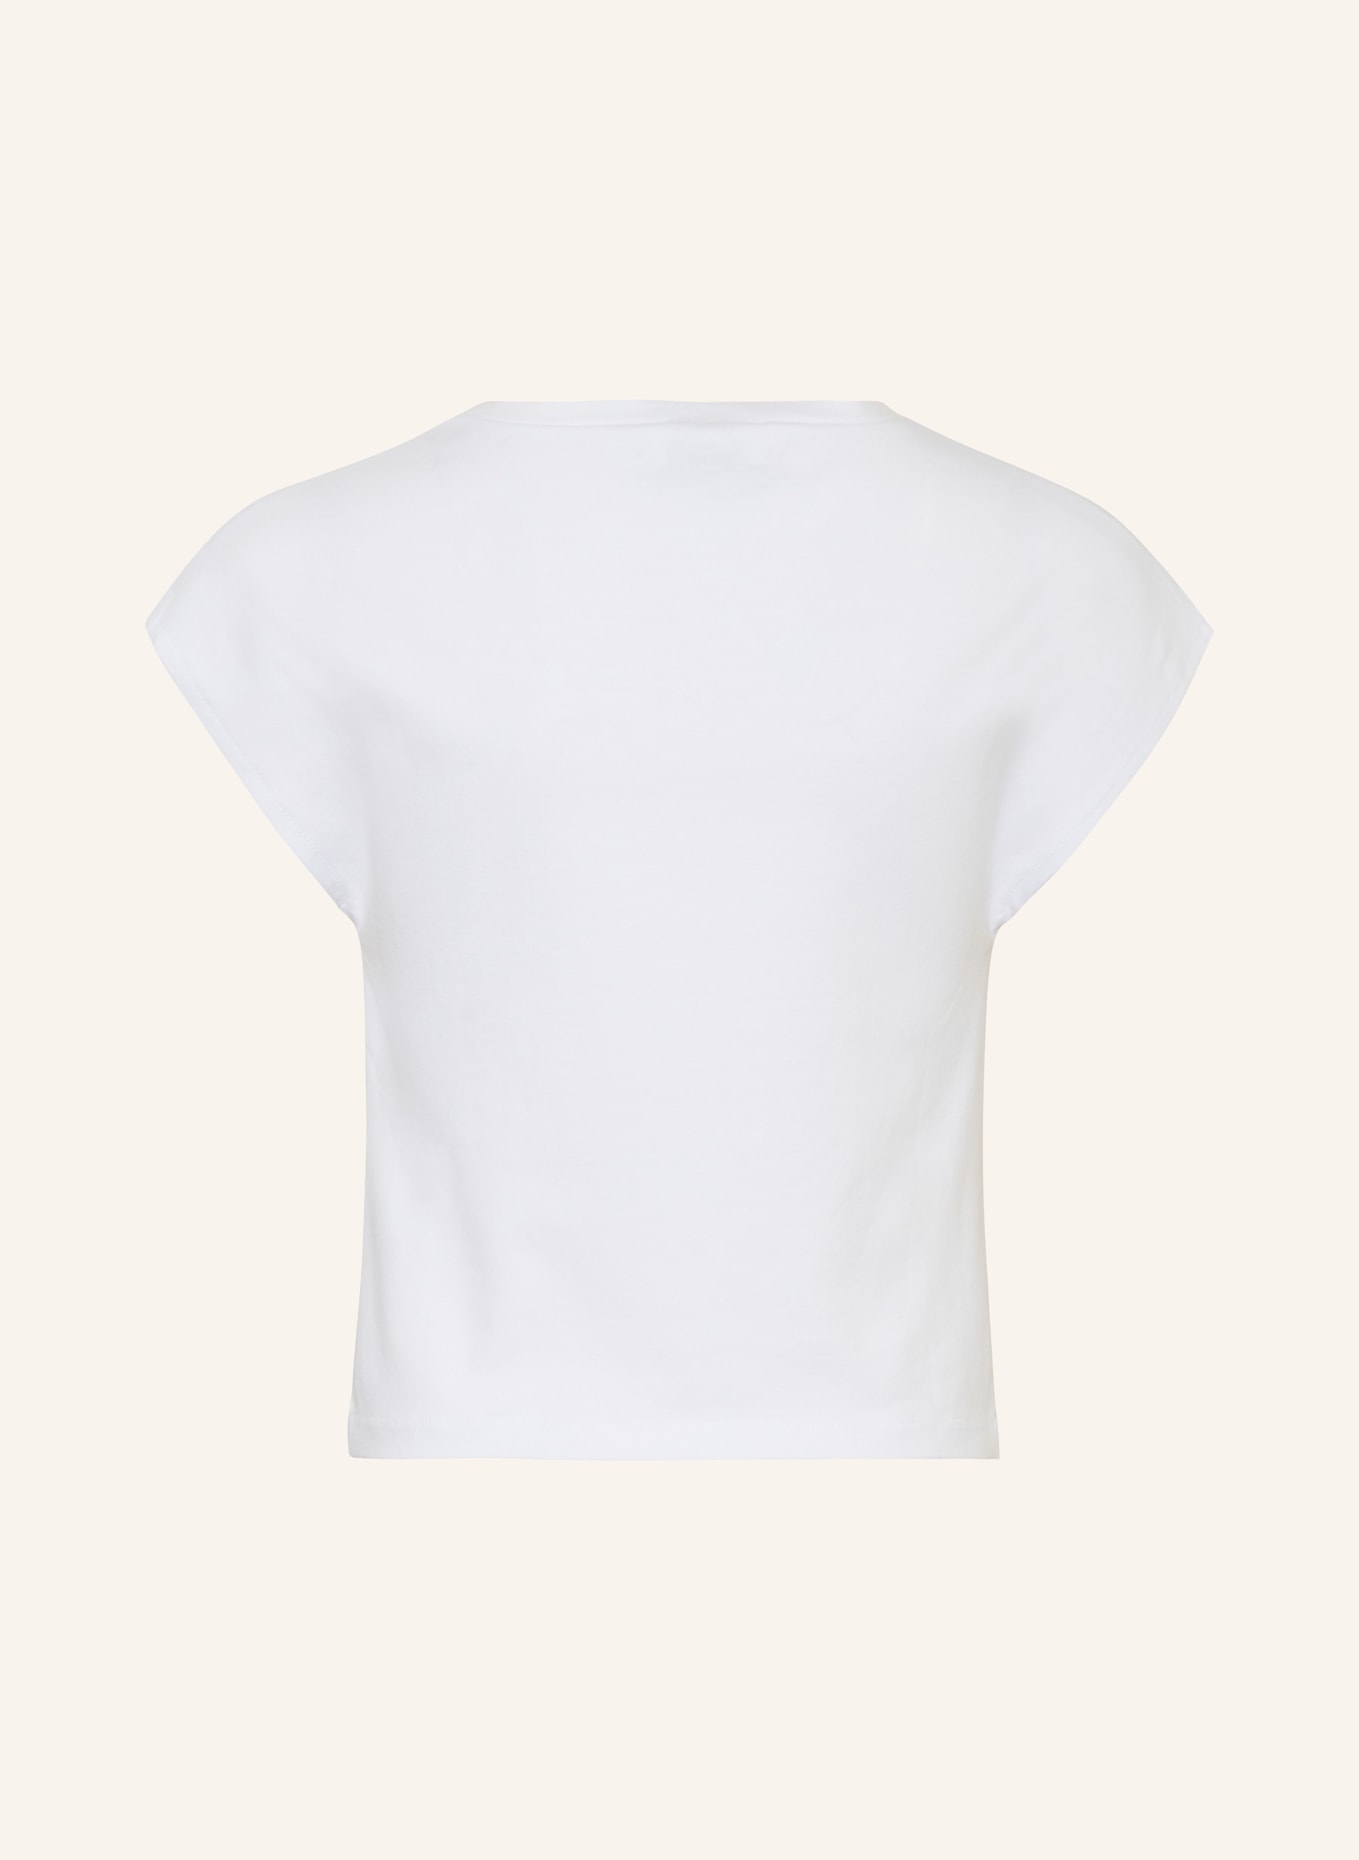 ELSY Cropped Shirt, Farbe: WEISS (Bild 2)